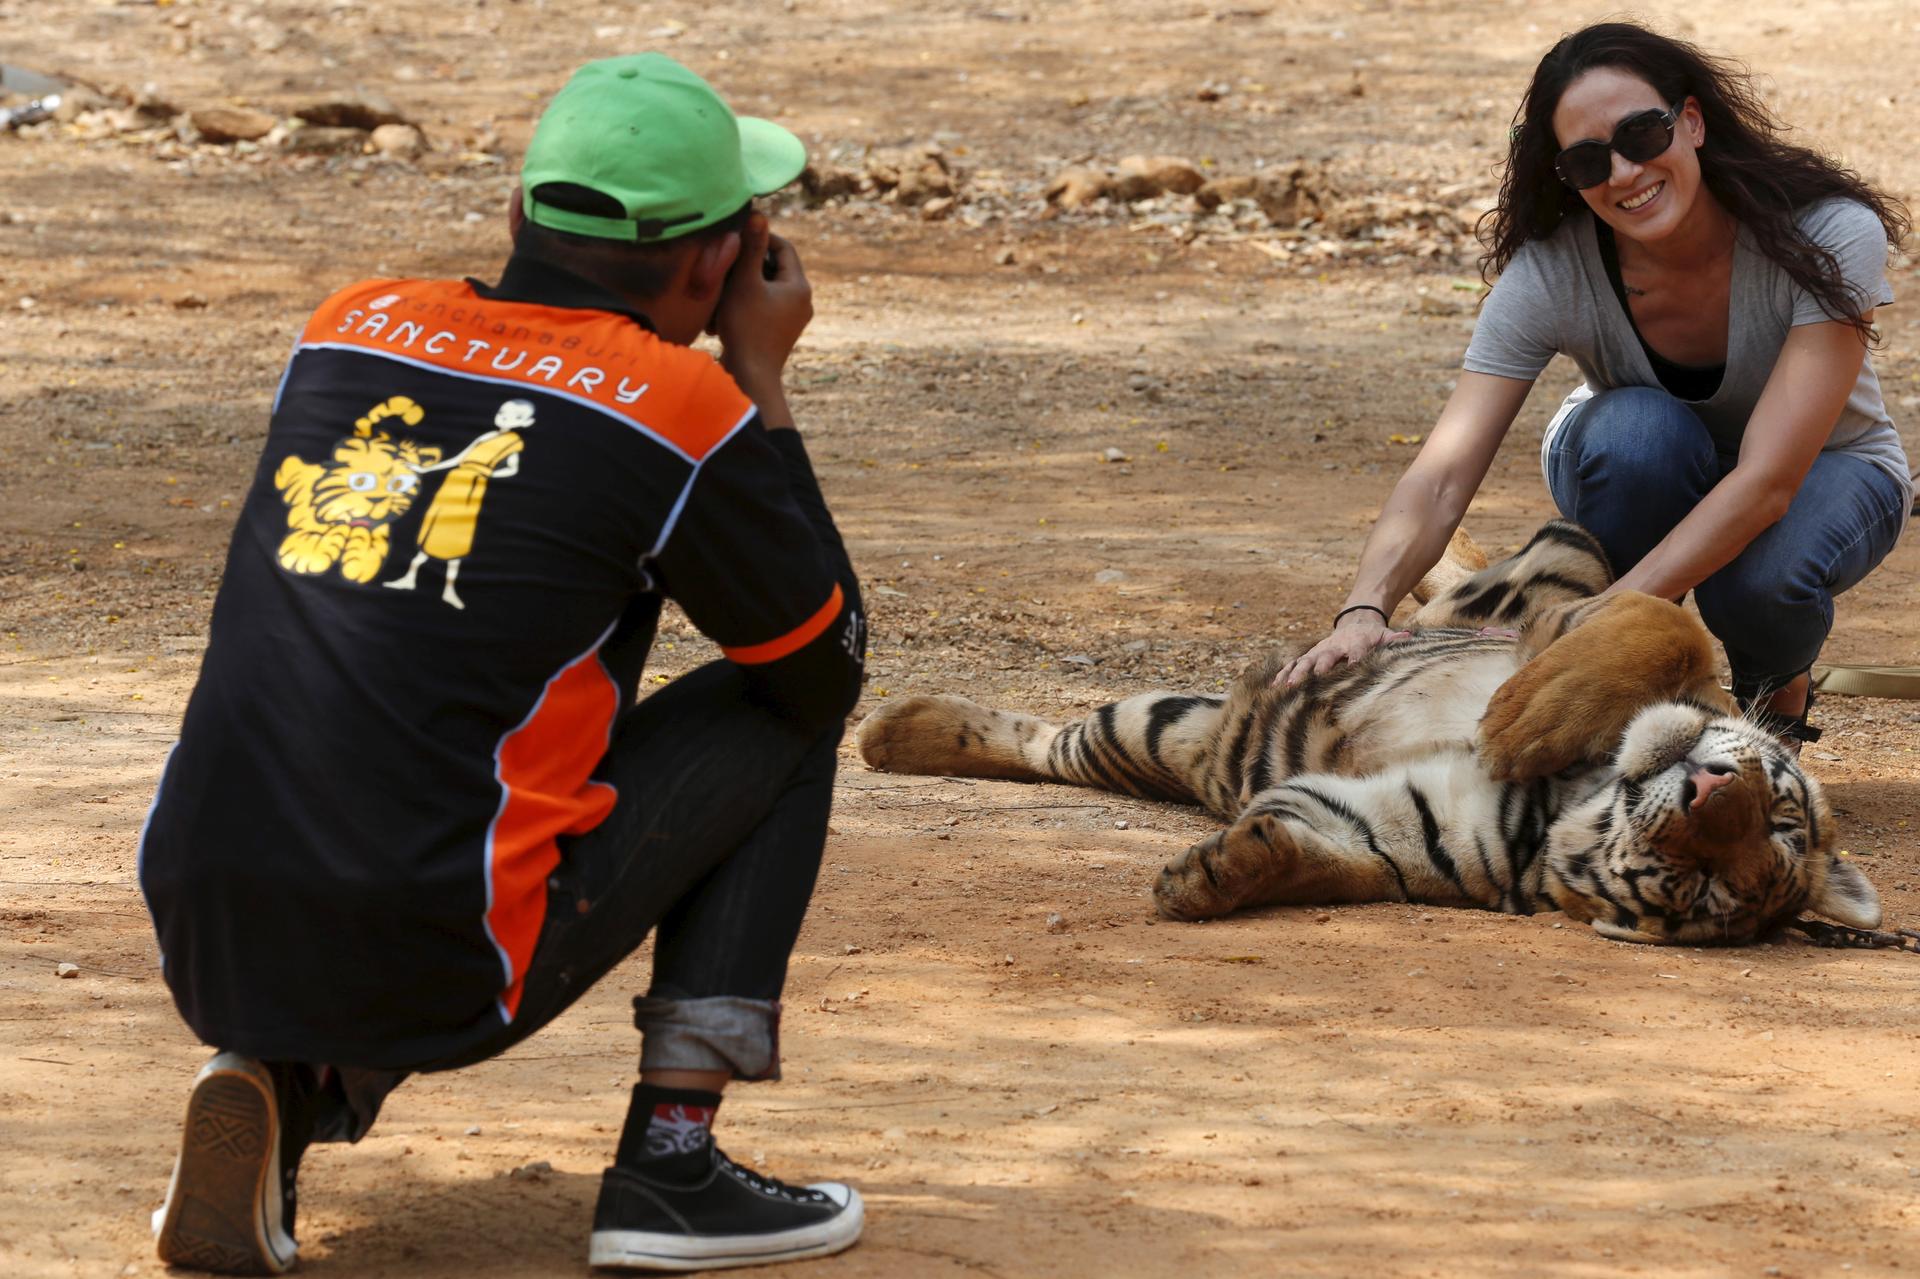 A tourist poses for picture at the Tiger Temple in Kanchanaburi province, west of Bangkok, Thailand, February 25, 2016.  The Tiger Temple is now closed after Thai wildlife officials raided it on May 30th and removed the remaining tigers in residence. The